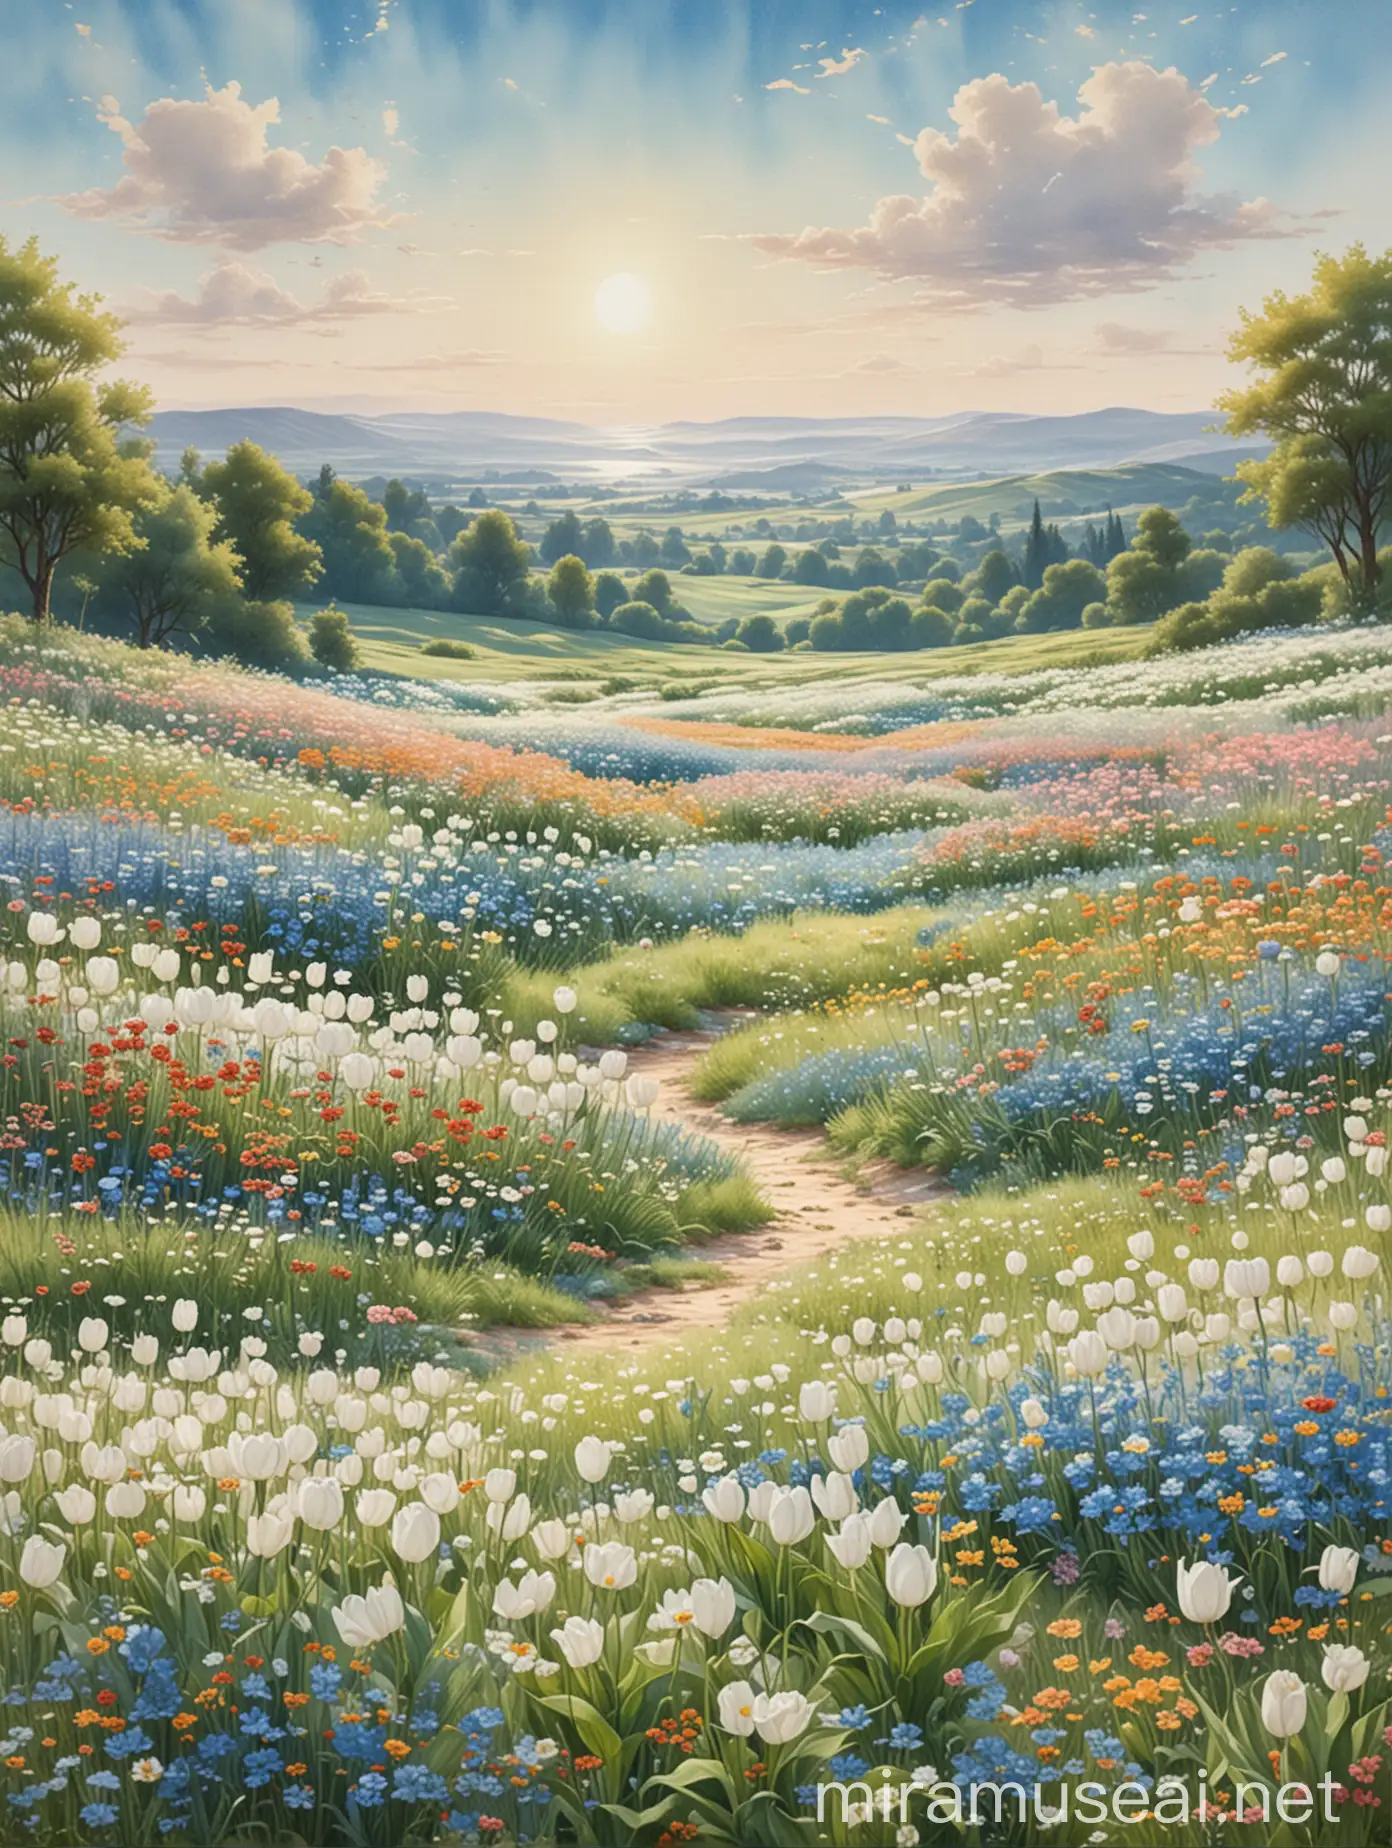 Flower field with wildflowers and white tulips, gentle hilltops in the distance, sunlit, blue sky, watercolours pastels like ghibli studio backgrounds